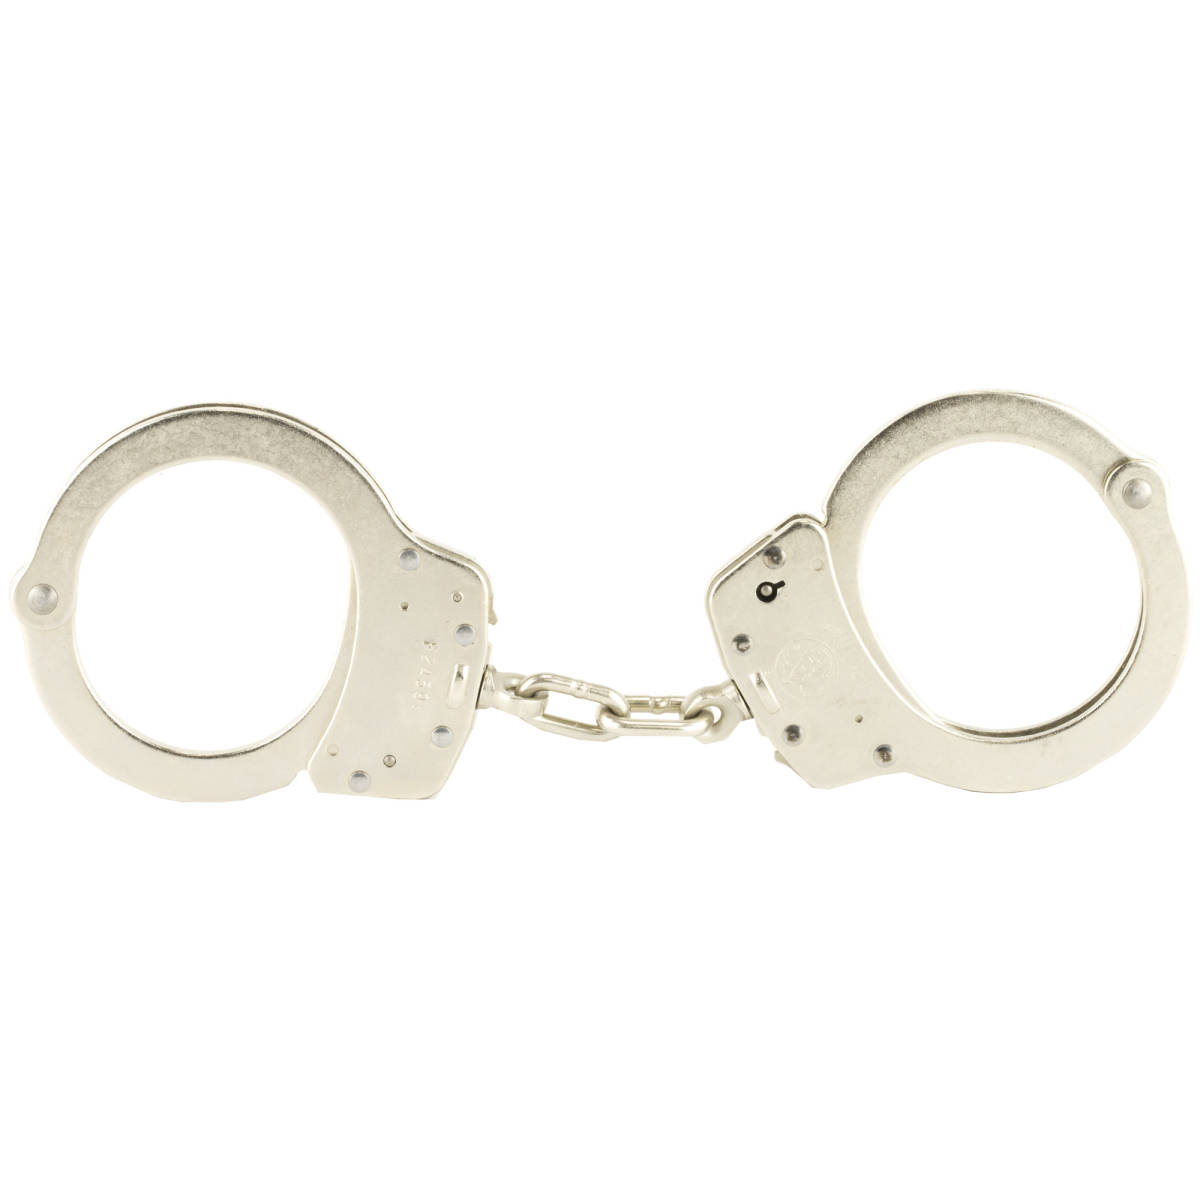 LESW 350122 100 MP LVRLCK HANDCUFFS NKL LE-img-1